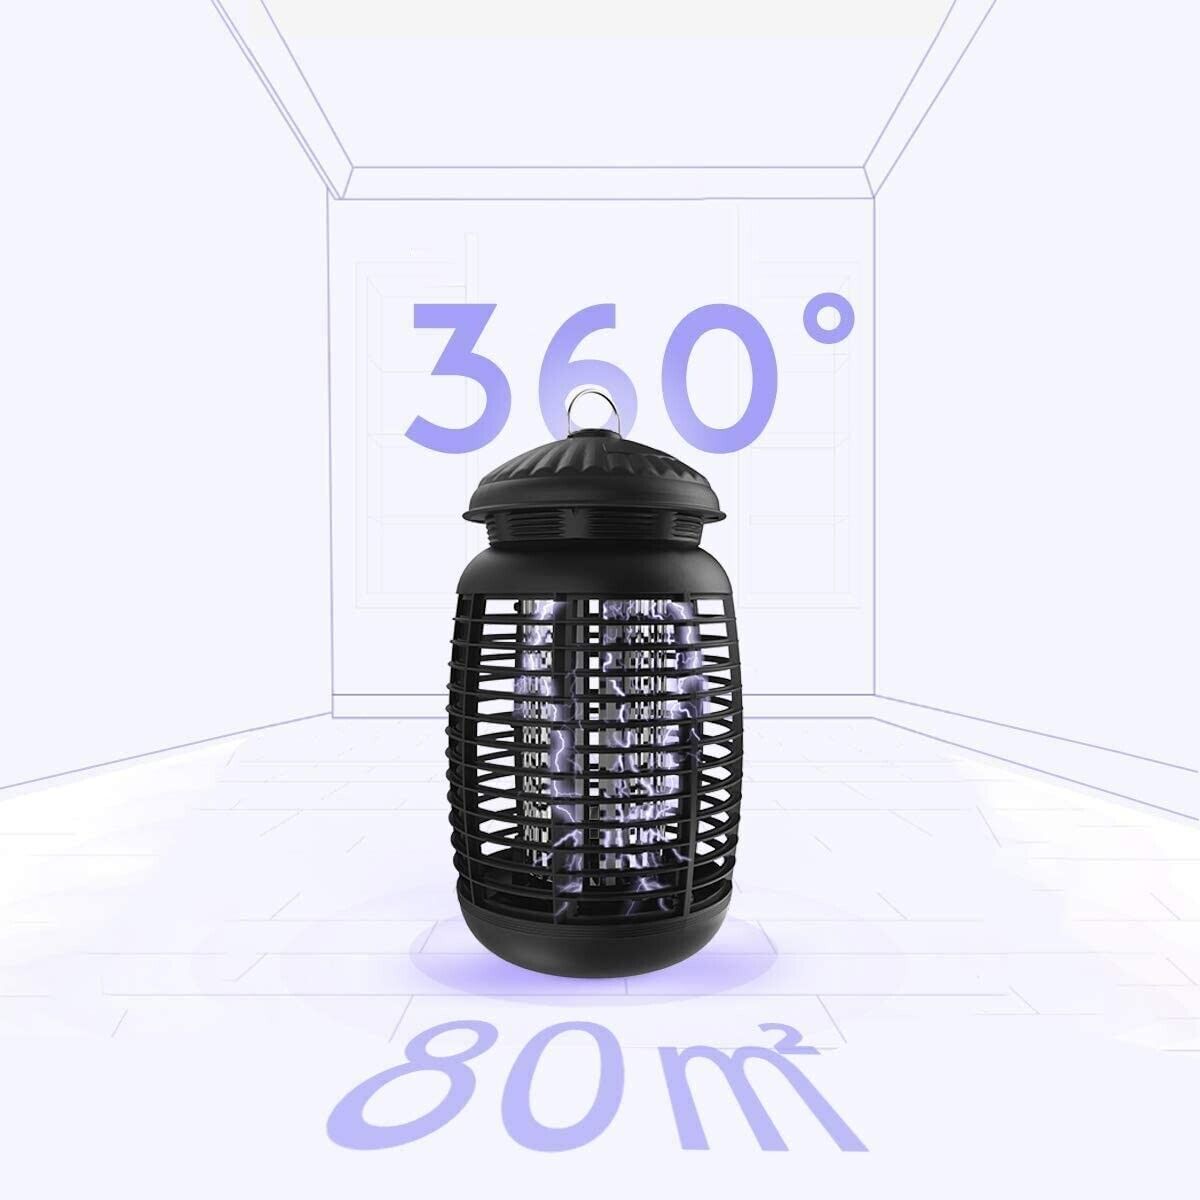 4000V Outdoor Bug Zapper for Electric Mosquito Zappers Killer Insect Fly Trap